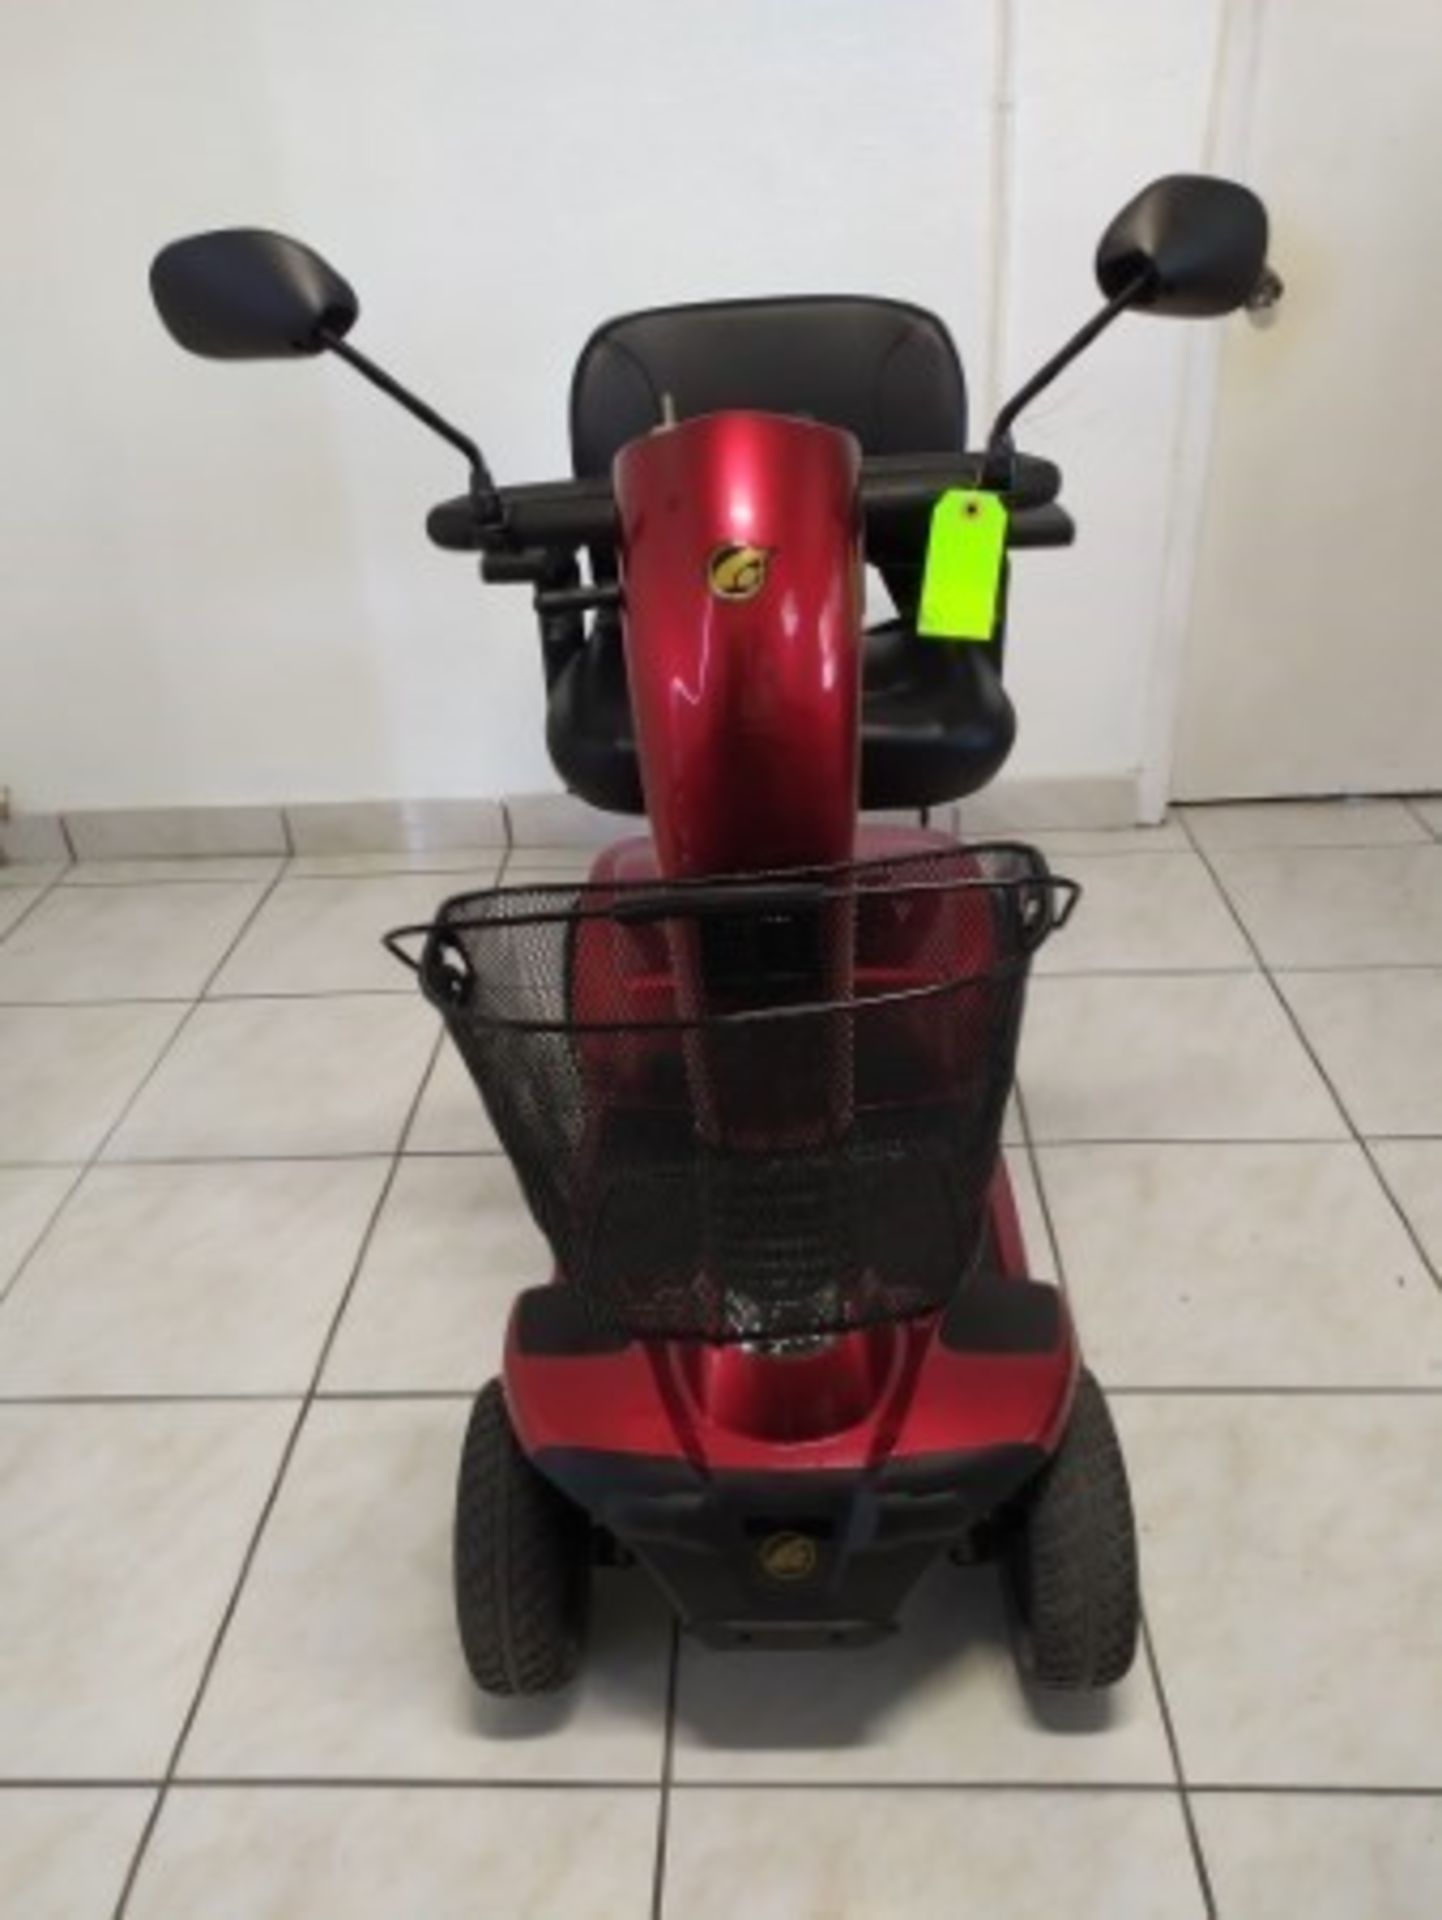 2016 GOLDEN COMPANION GC440 4-WHEEL SCOOTER WITH CHARGER & BASKET - RED - 400LB CAPACITY - SERIAL No